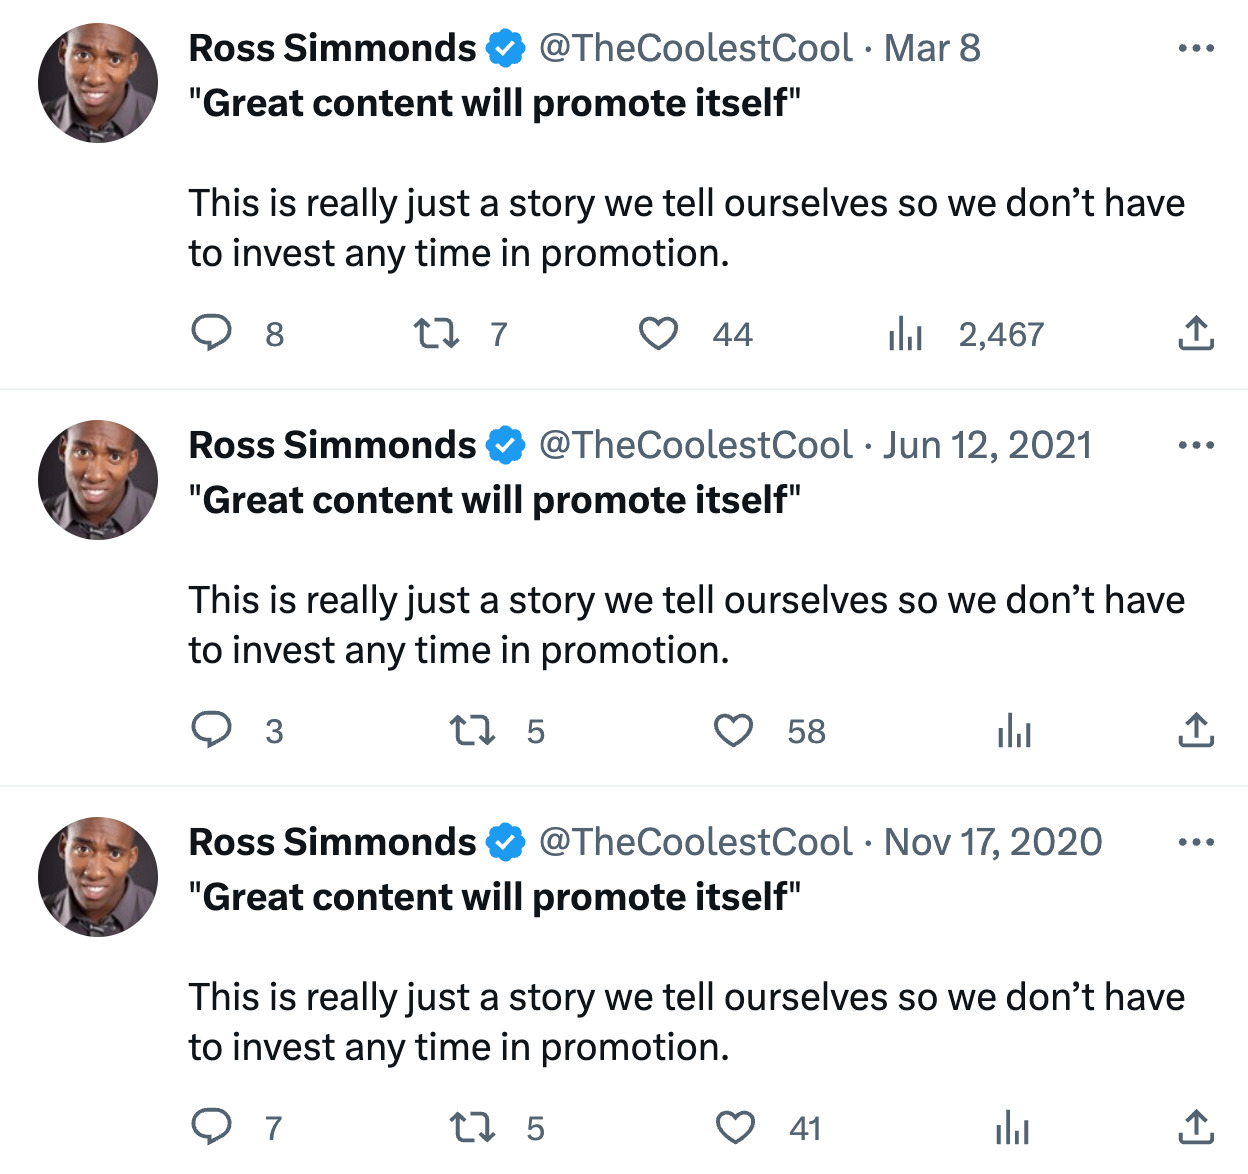 The same tweets by Ross Simmonds over a period of three years
